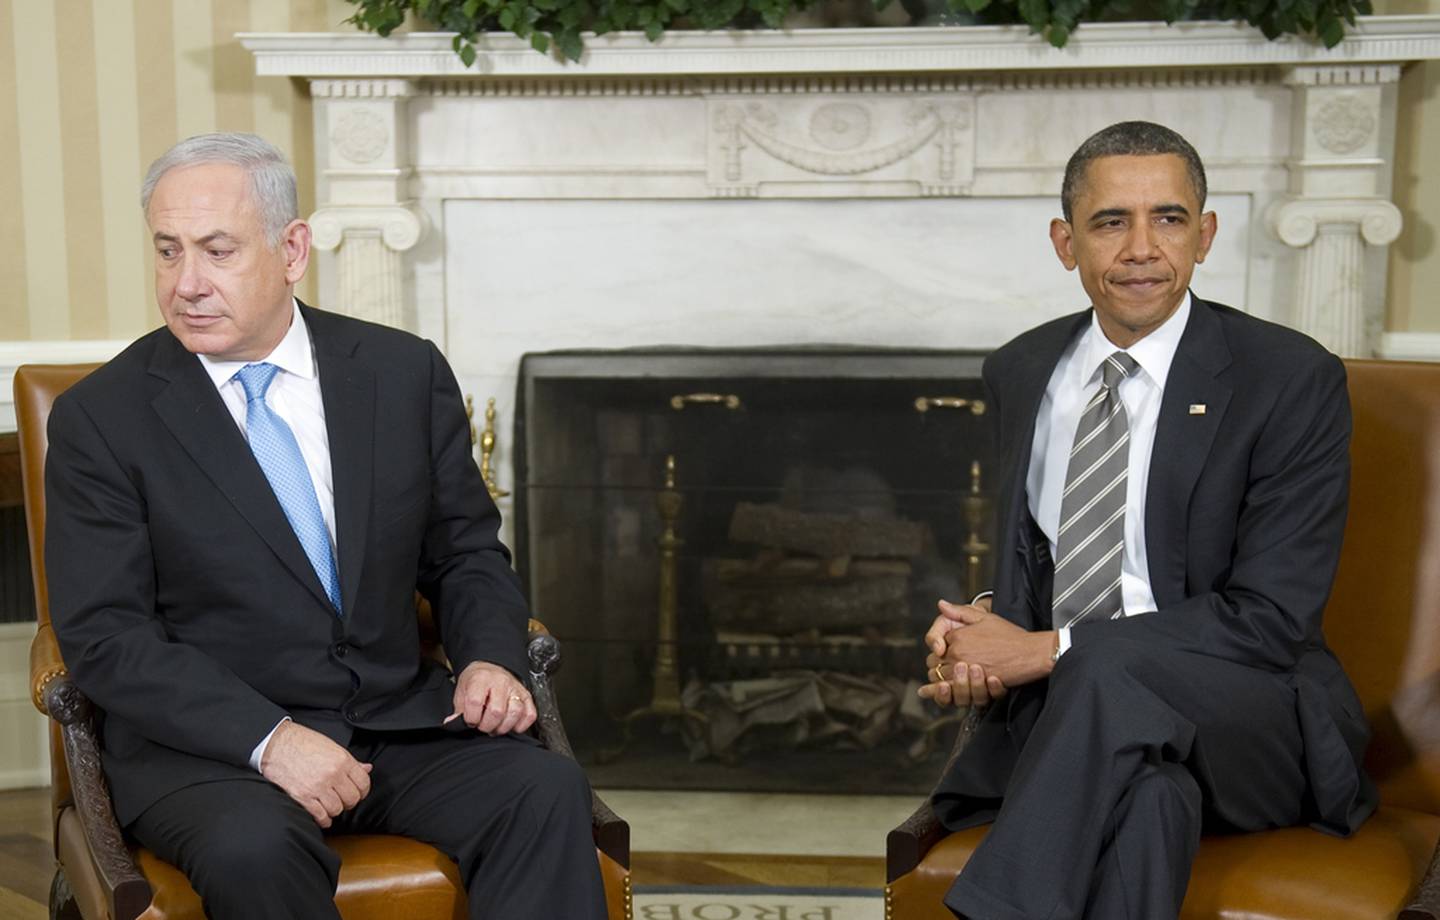 Relations between Benjamin Netanyahu and Barack Obama were never been particularly warm. AFP 